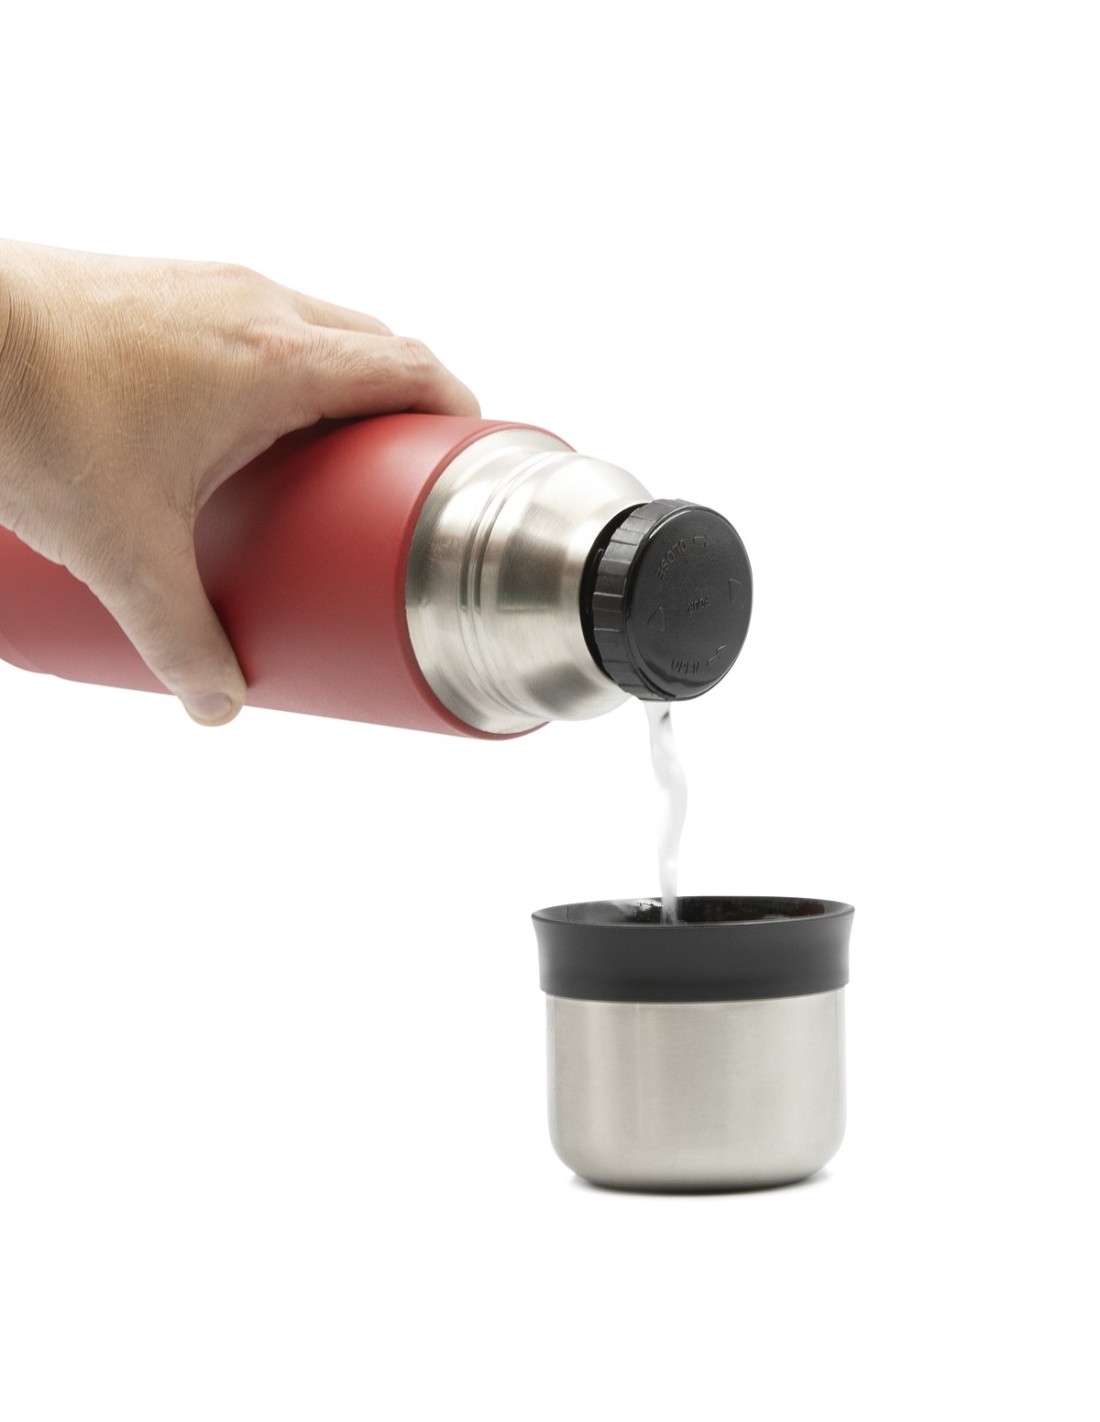 STAINLESS STEEL THERMO LIQUIDS FLASK WITH CAP-MUG